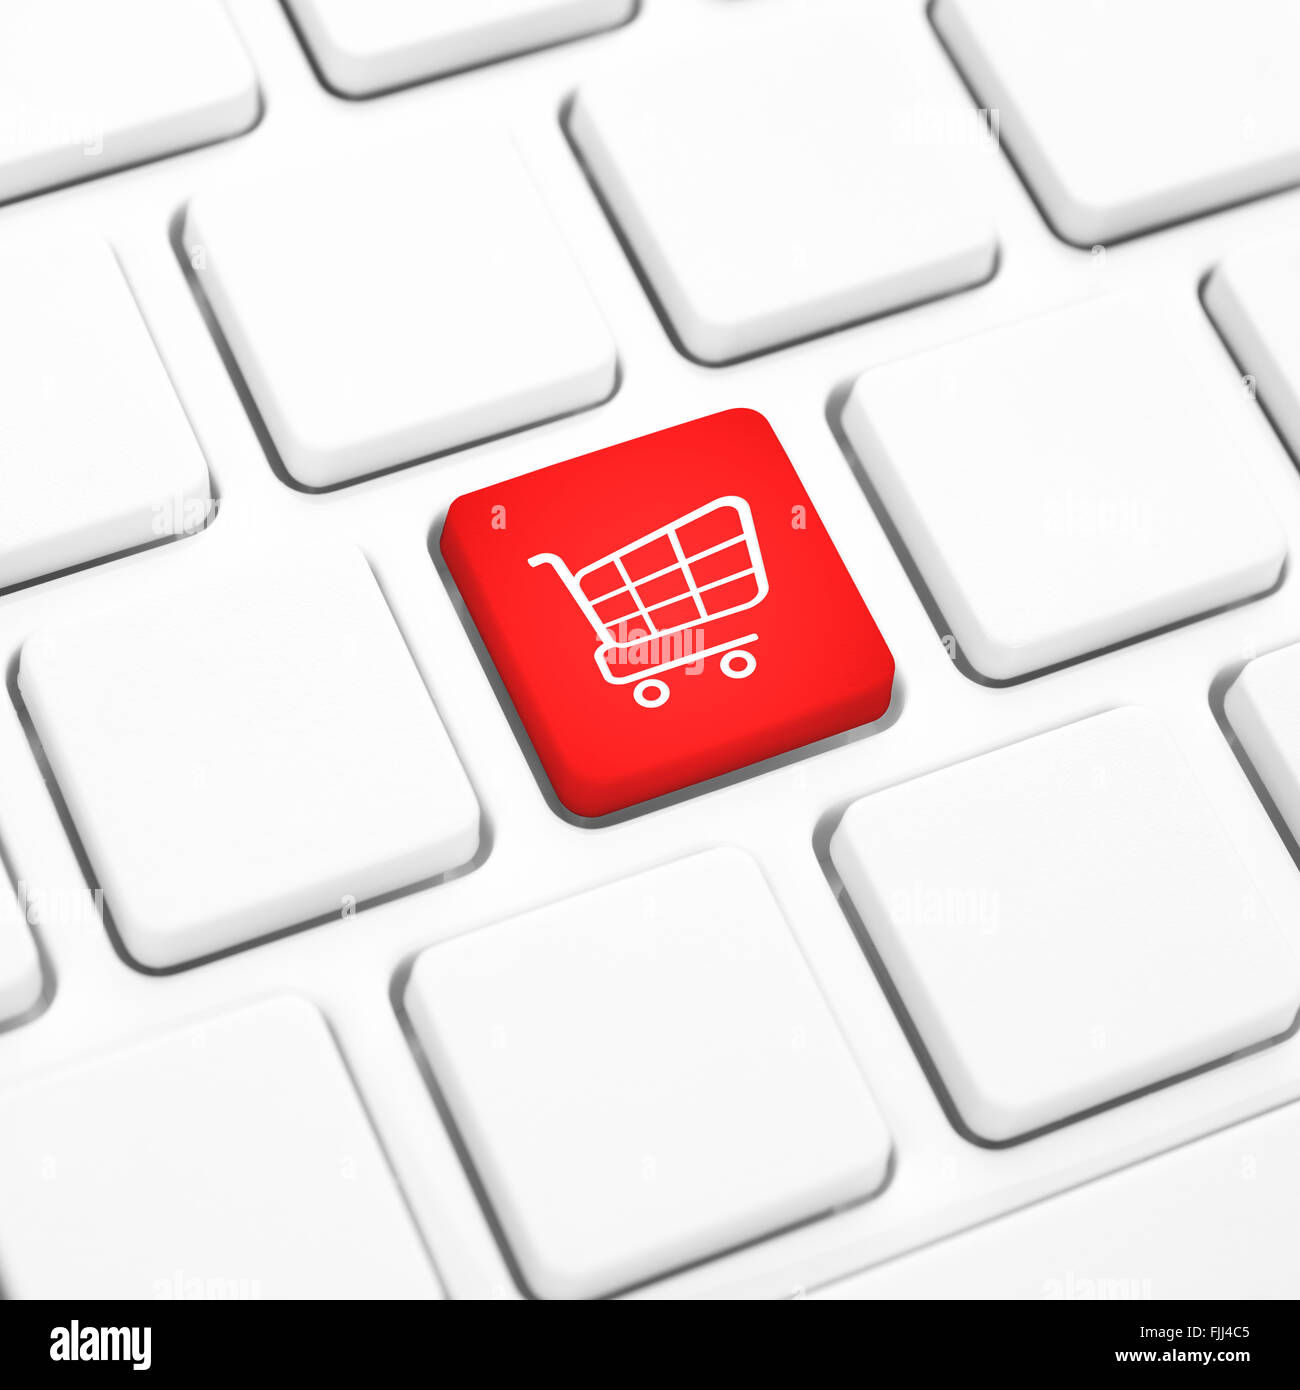 Shop online business concept, Red shopping cart button or key on white keyboard Stock Photo